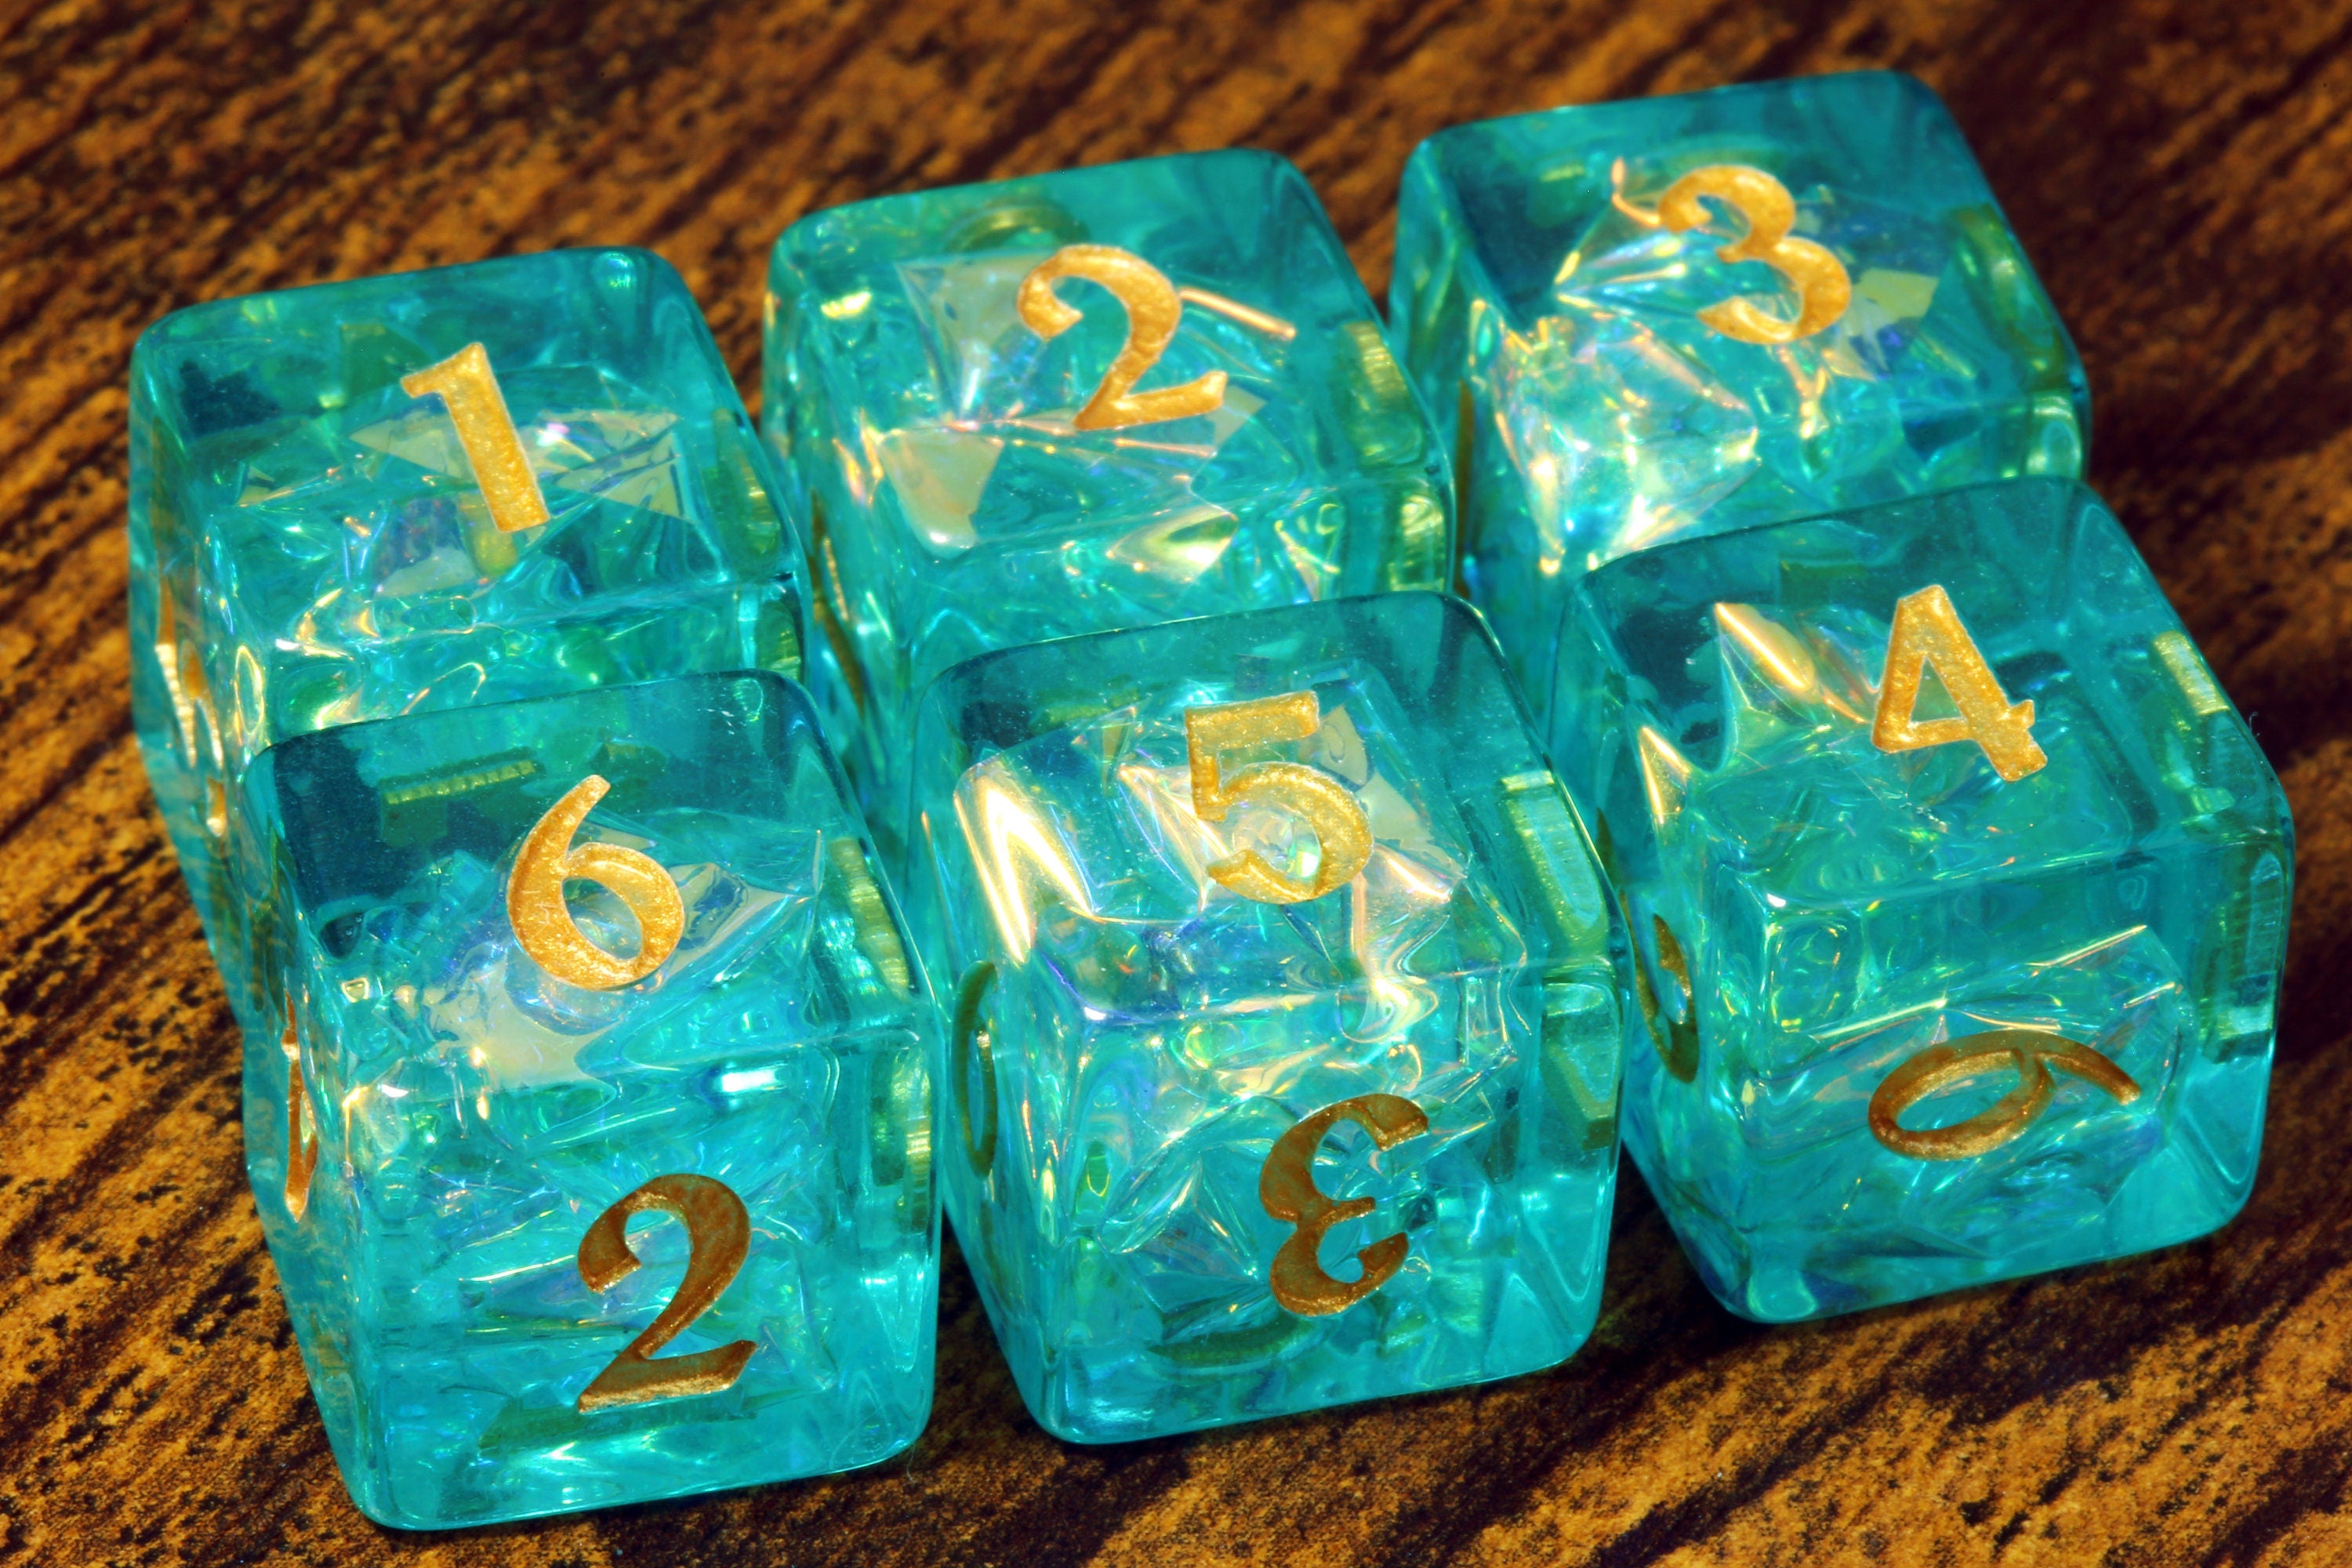 Ocean Opal D6 dice - Turquoise green Holographic inclusions